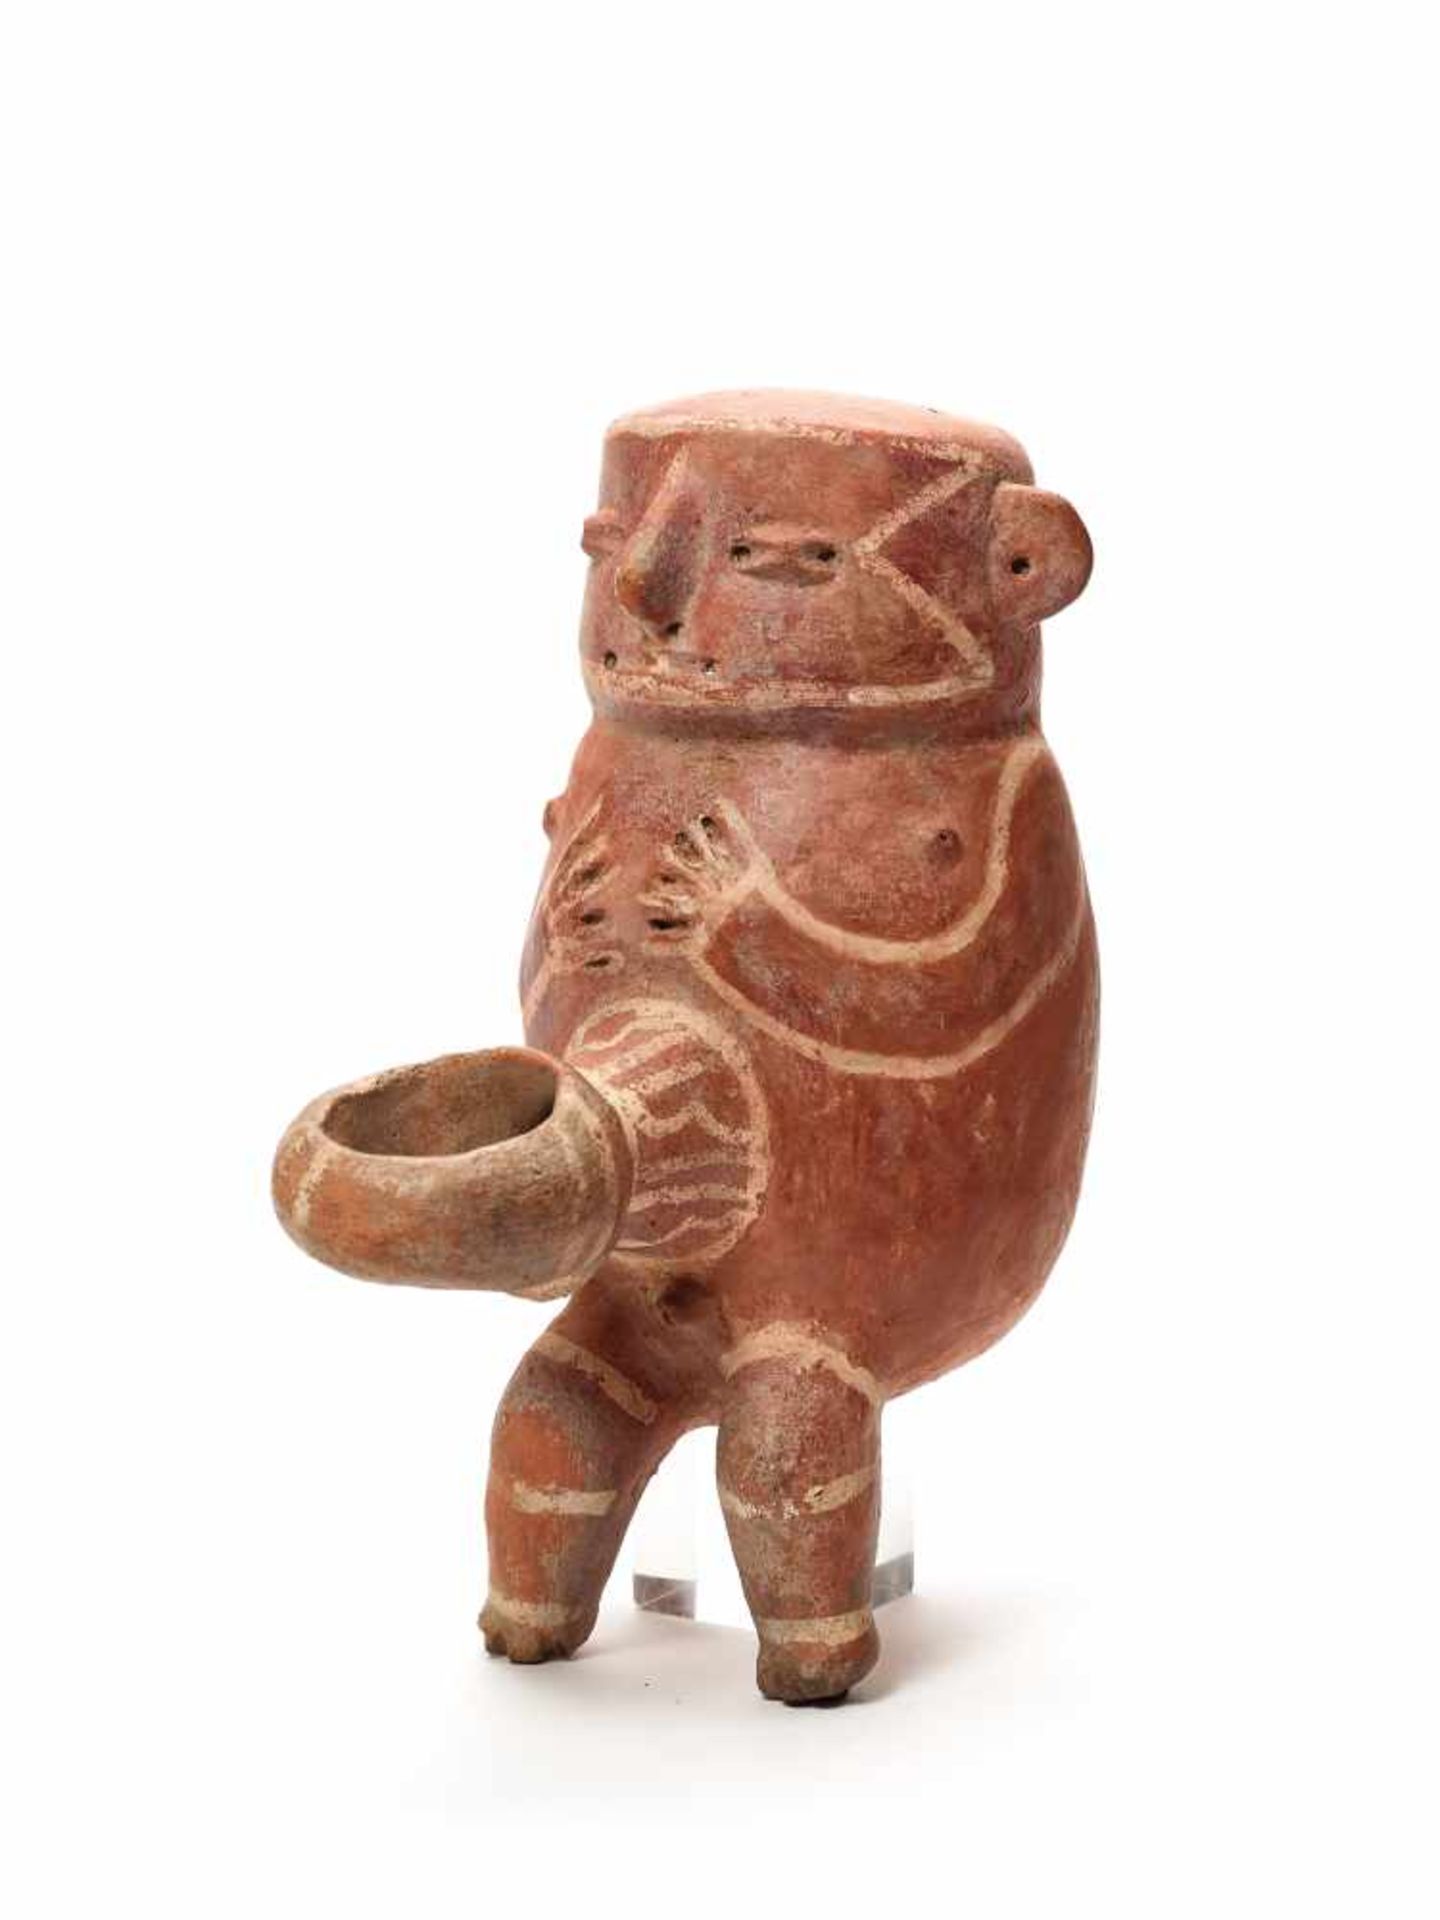 TL-TESTED BABY-SHAPED VESSEL- VICUS CULTURE, PERU, C. 3RD CENTURY BCFired clay painted in shades - Image 3 of 5